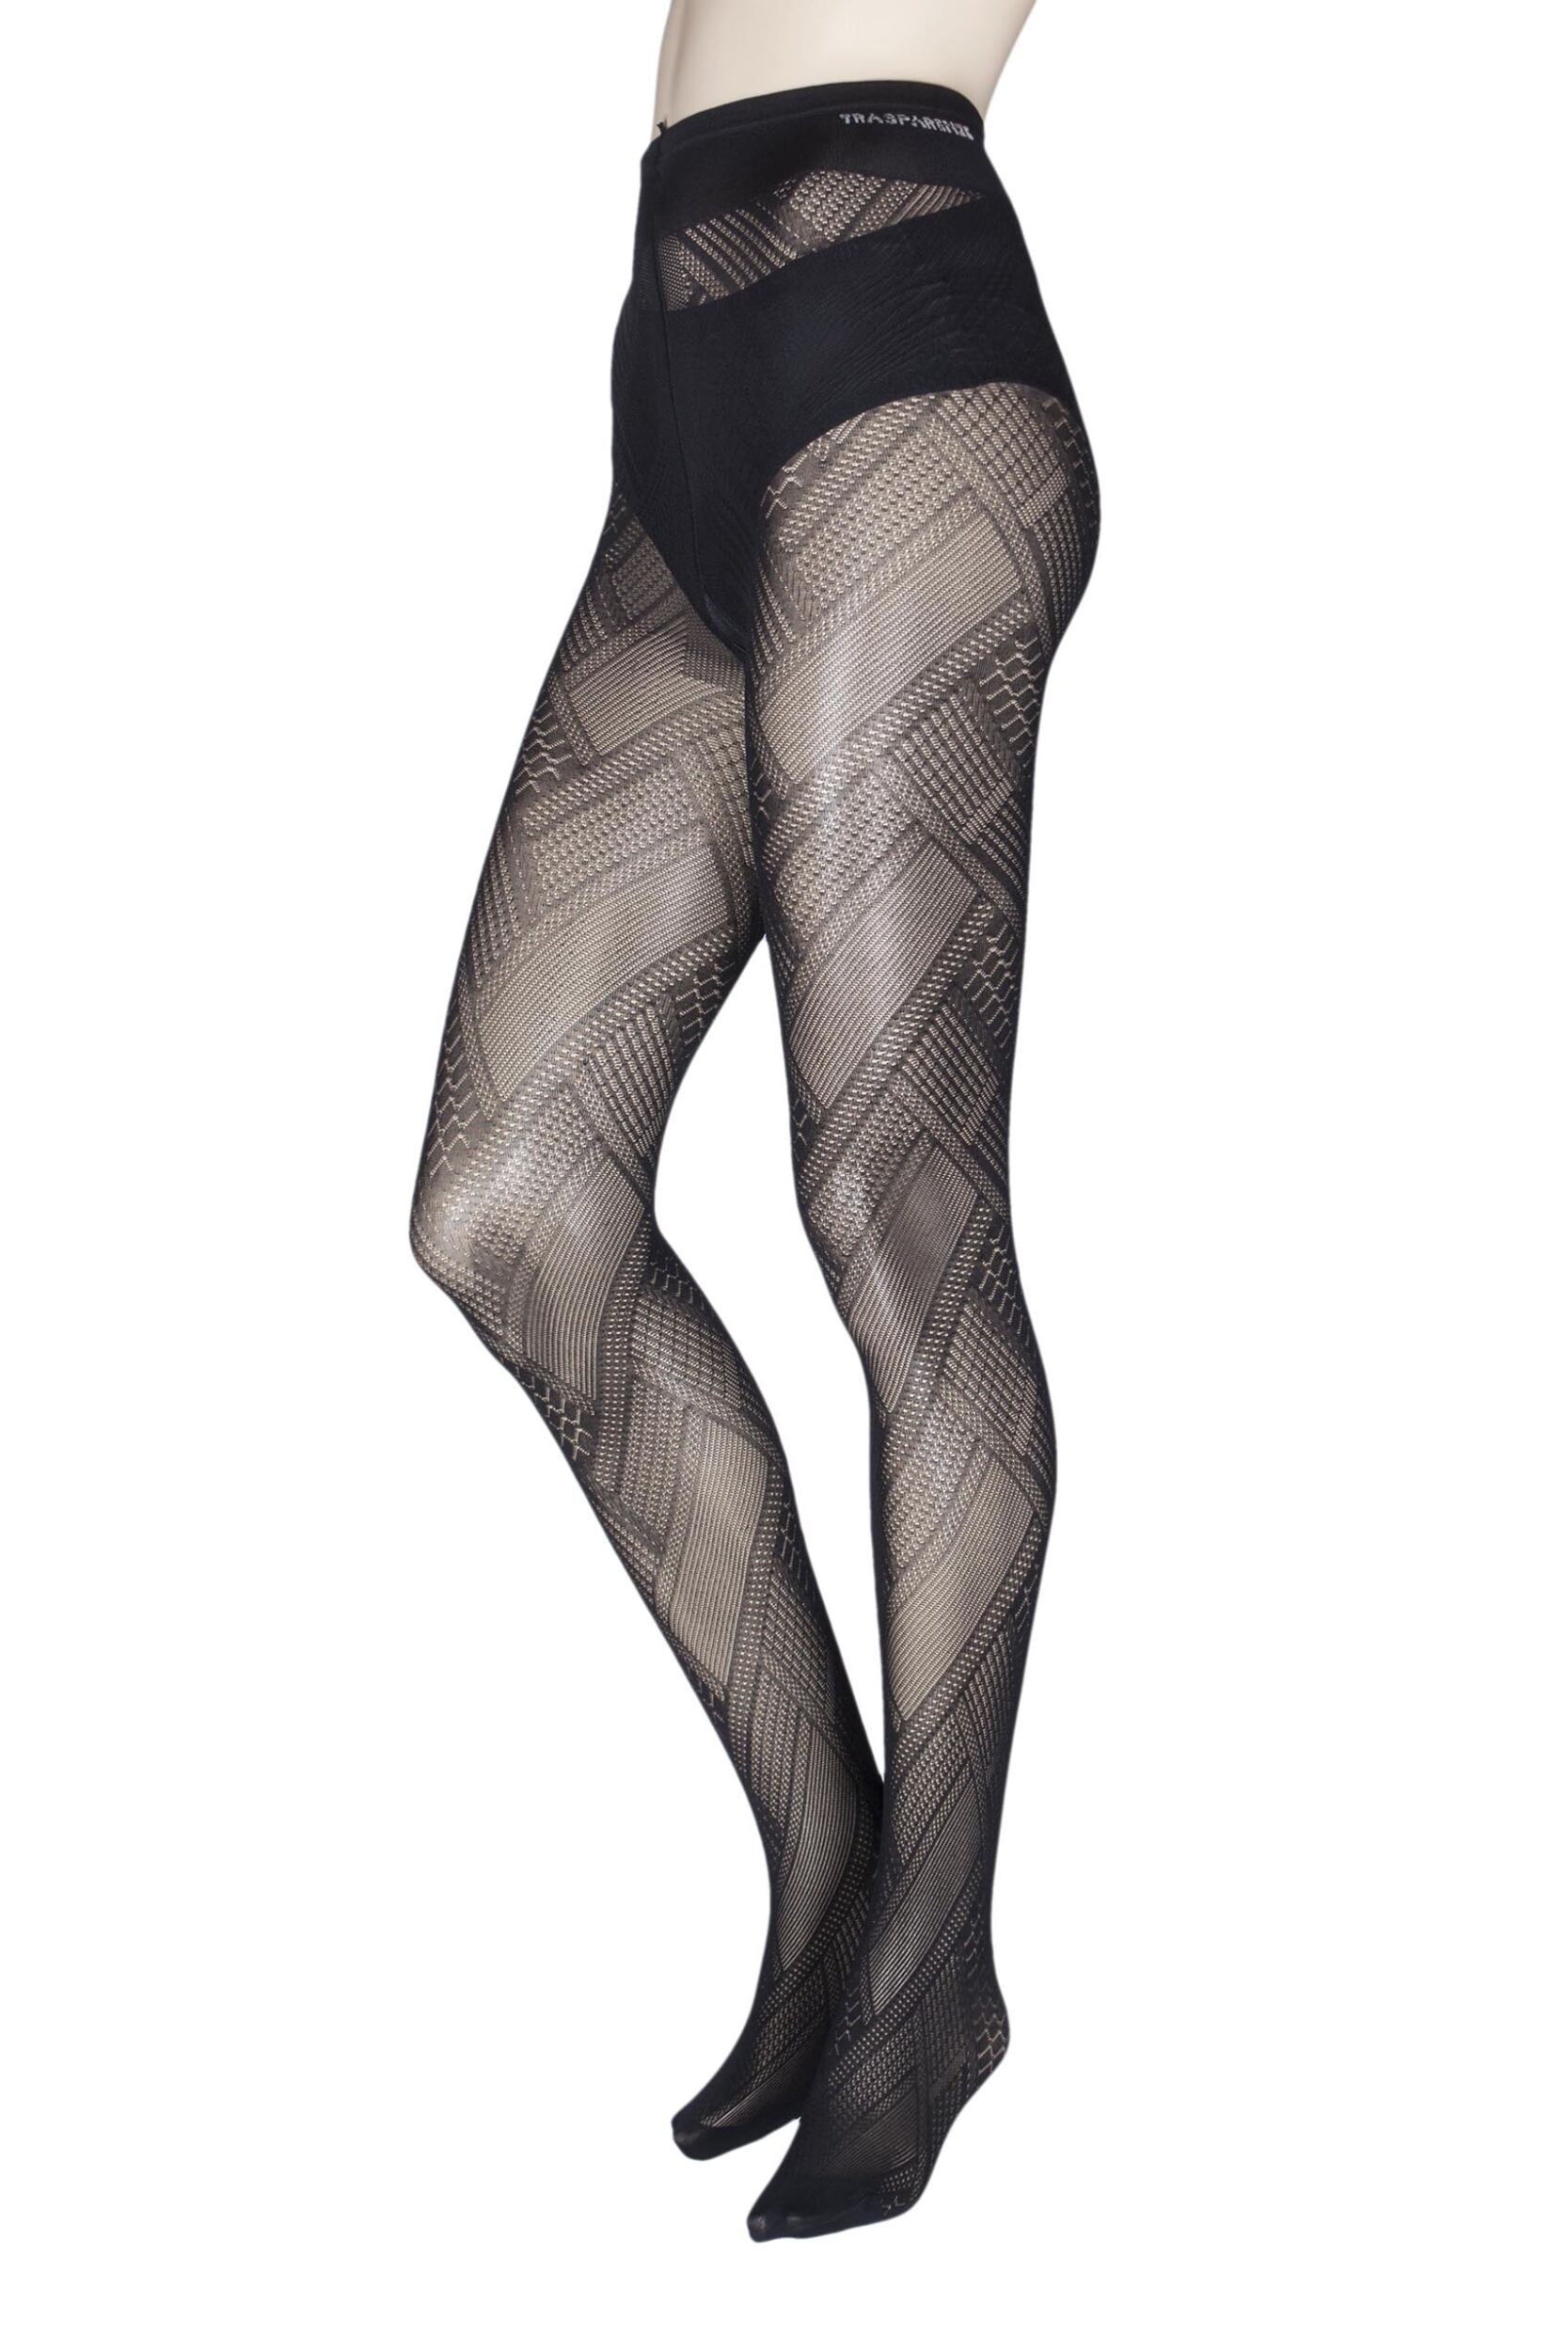 1 Pair Black Soave Patterned Opaque Tights Ladies Maxi - Trasparenze